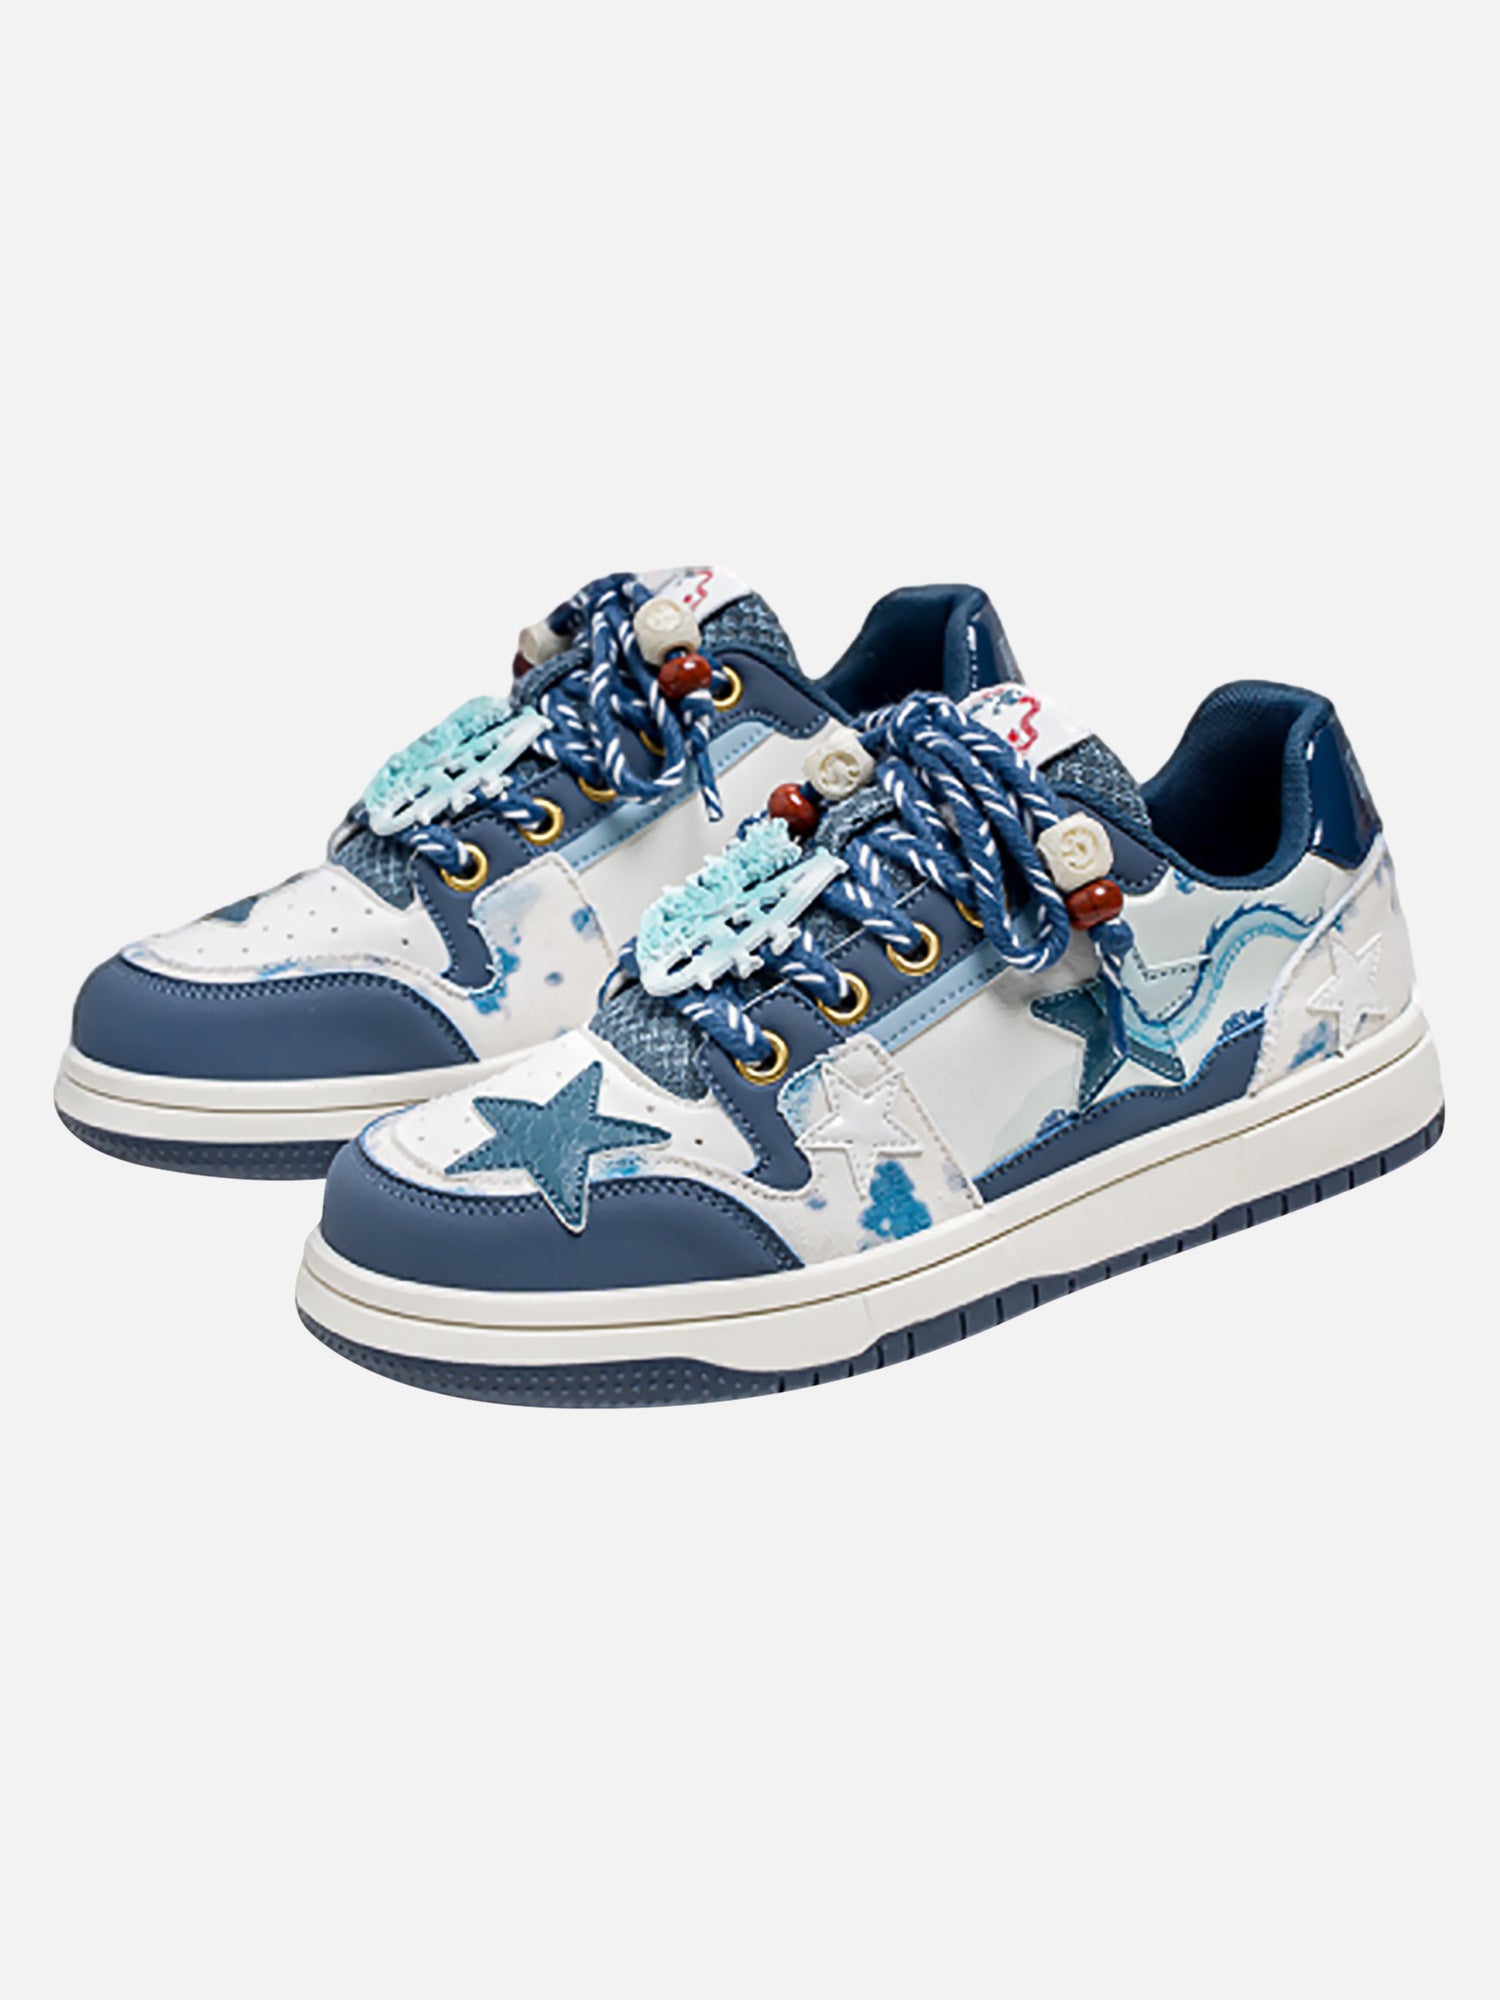 Dragon Limited Blue Star Retro Casual Sneakers